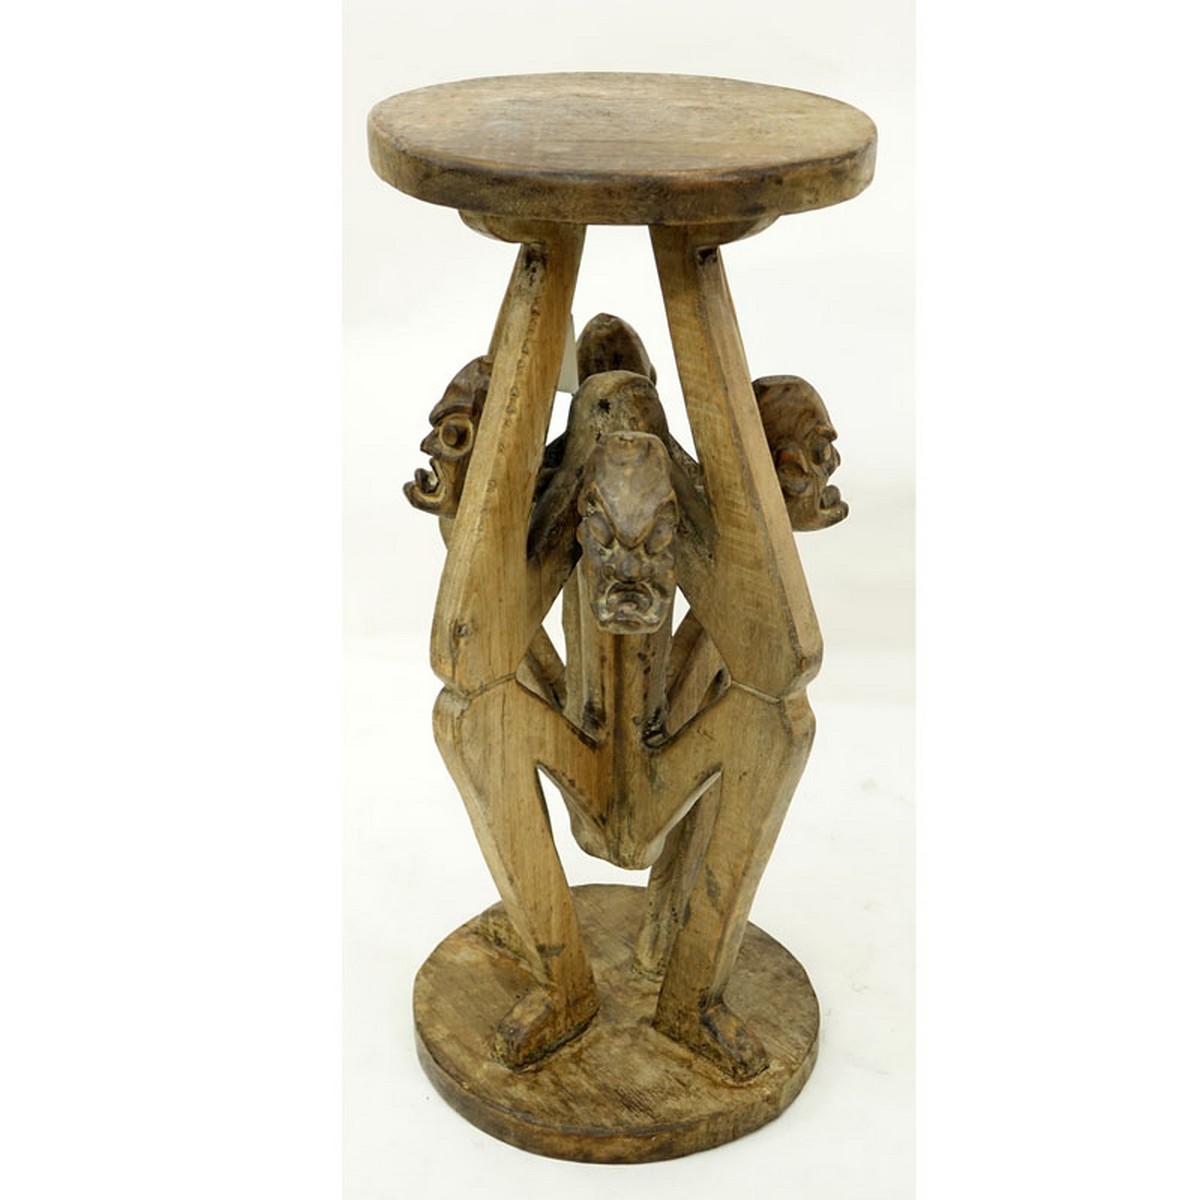 20th Century African Wood Carved Figural Stool, Attributed to the Republic of Congo. Typical condition associated with aging of natural wood otherwise good condition.